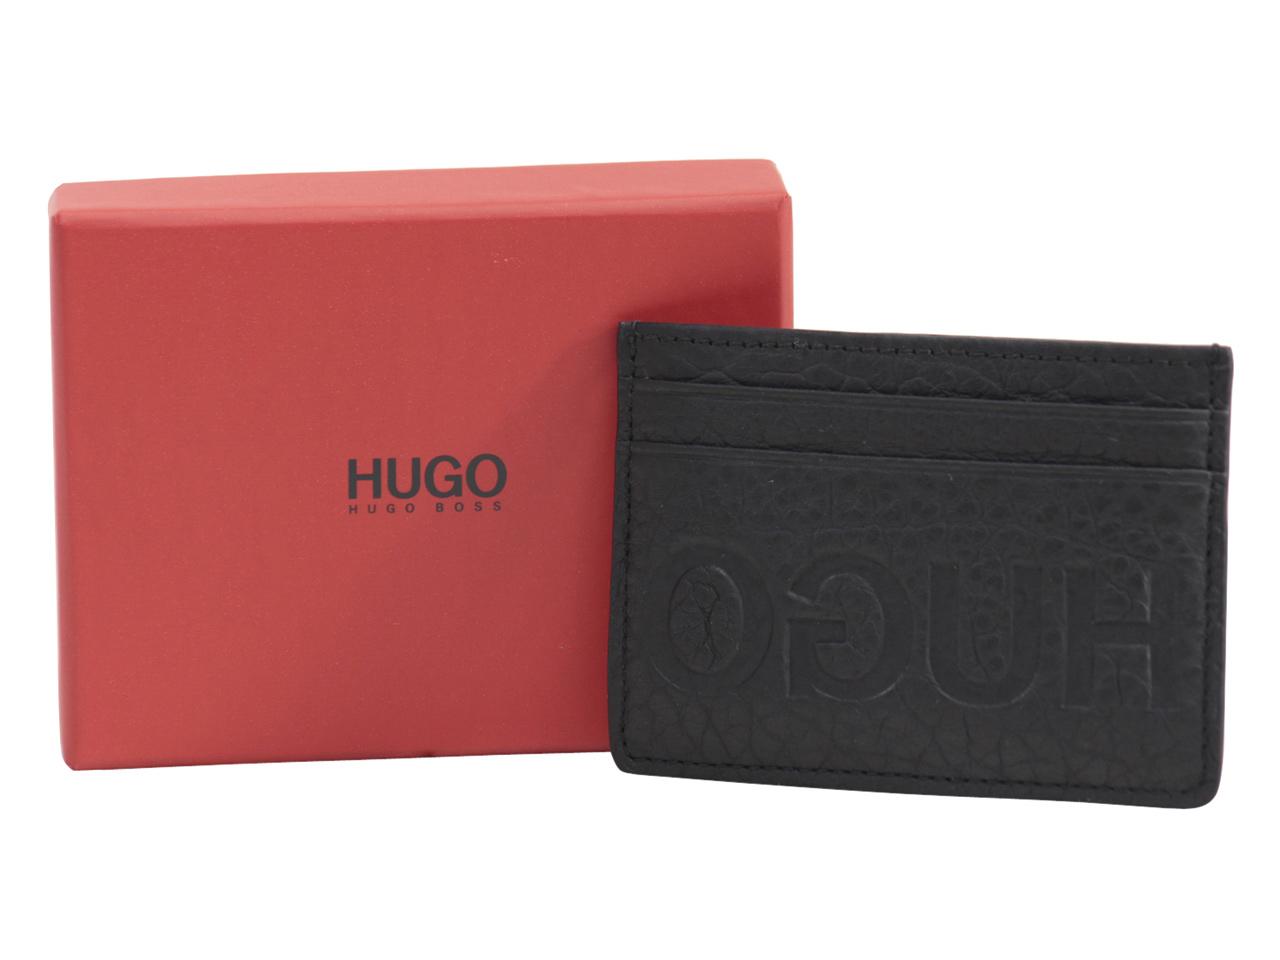 Hugo Boss Original Leather Wallet Credit Card, Notes & Coins for Christmas  Gift | eBay